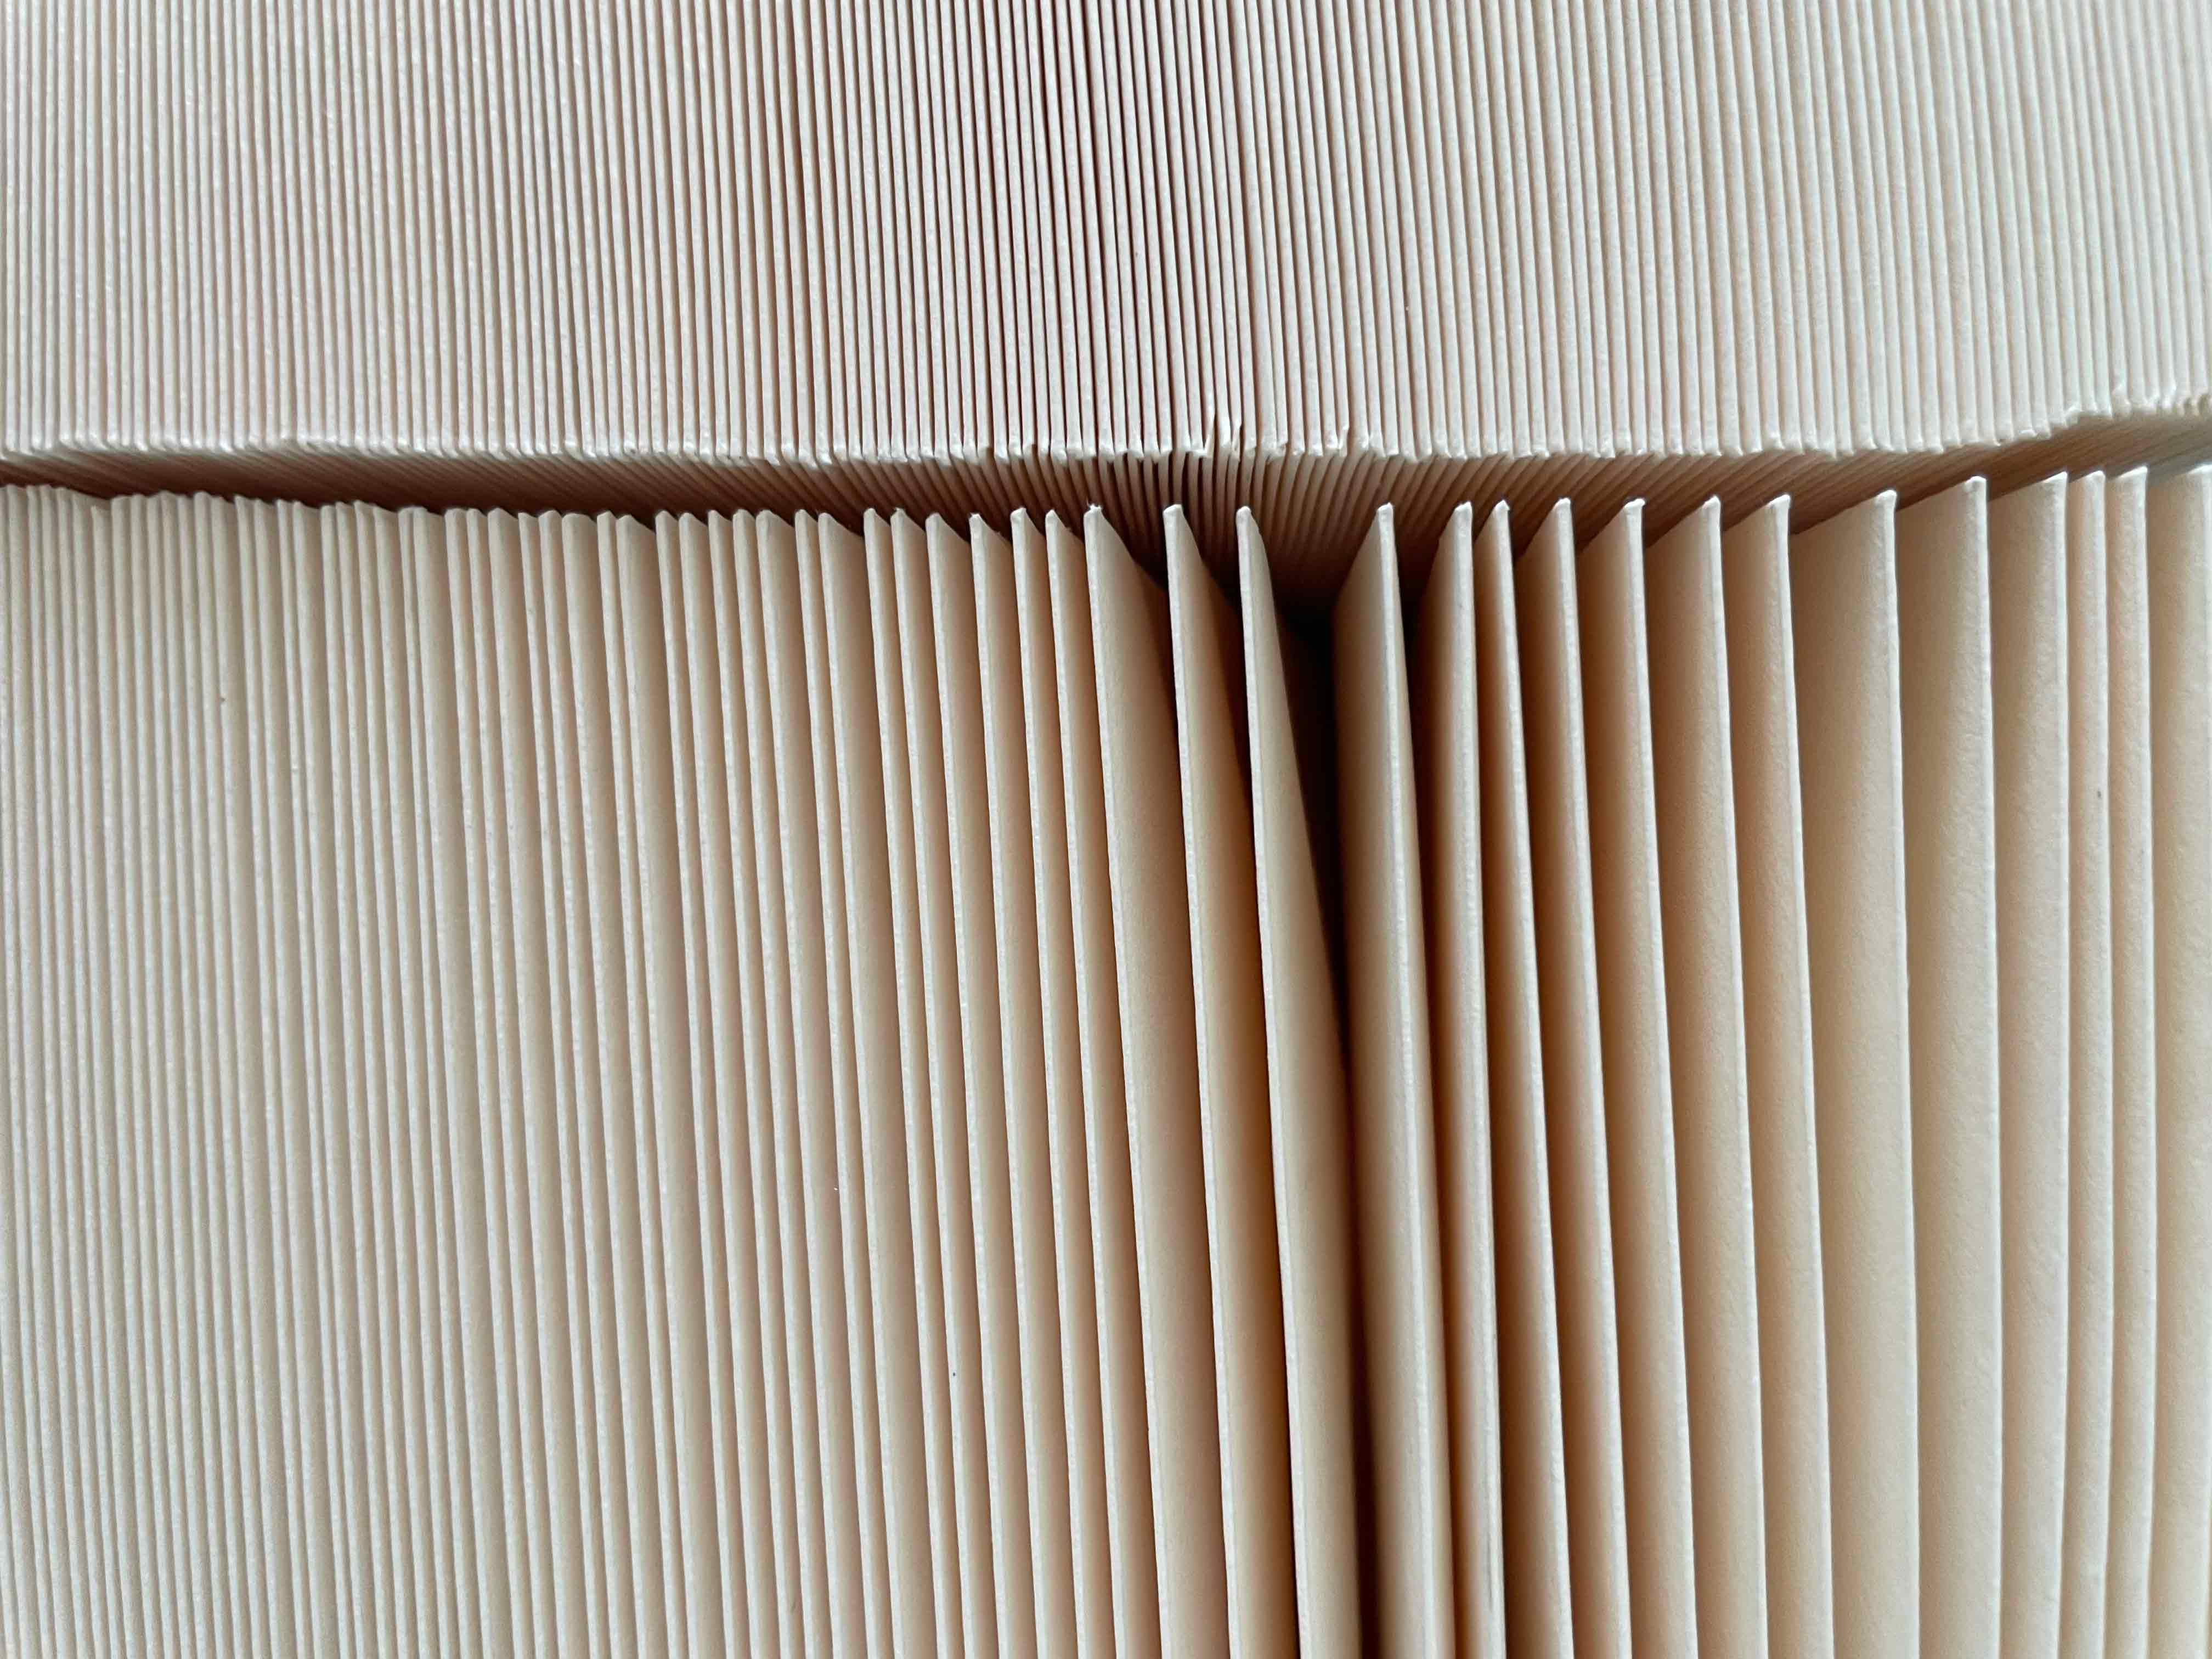 Side angle view of envelopes